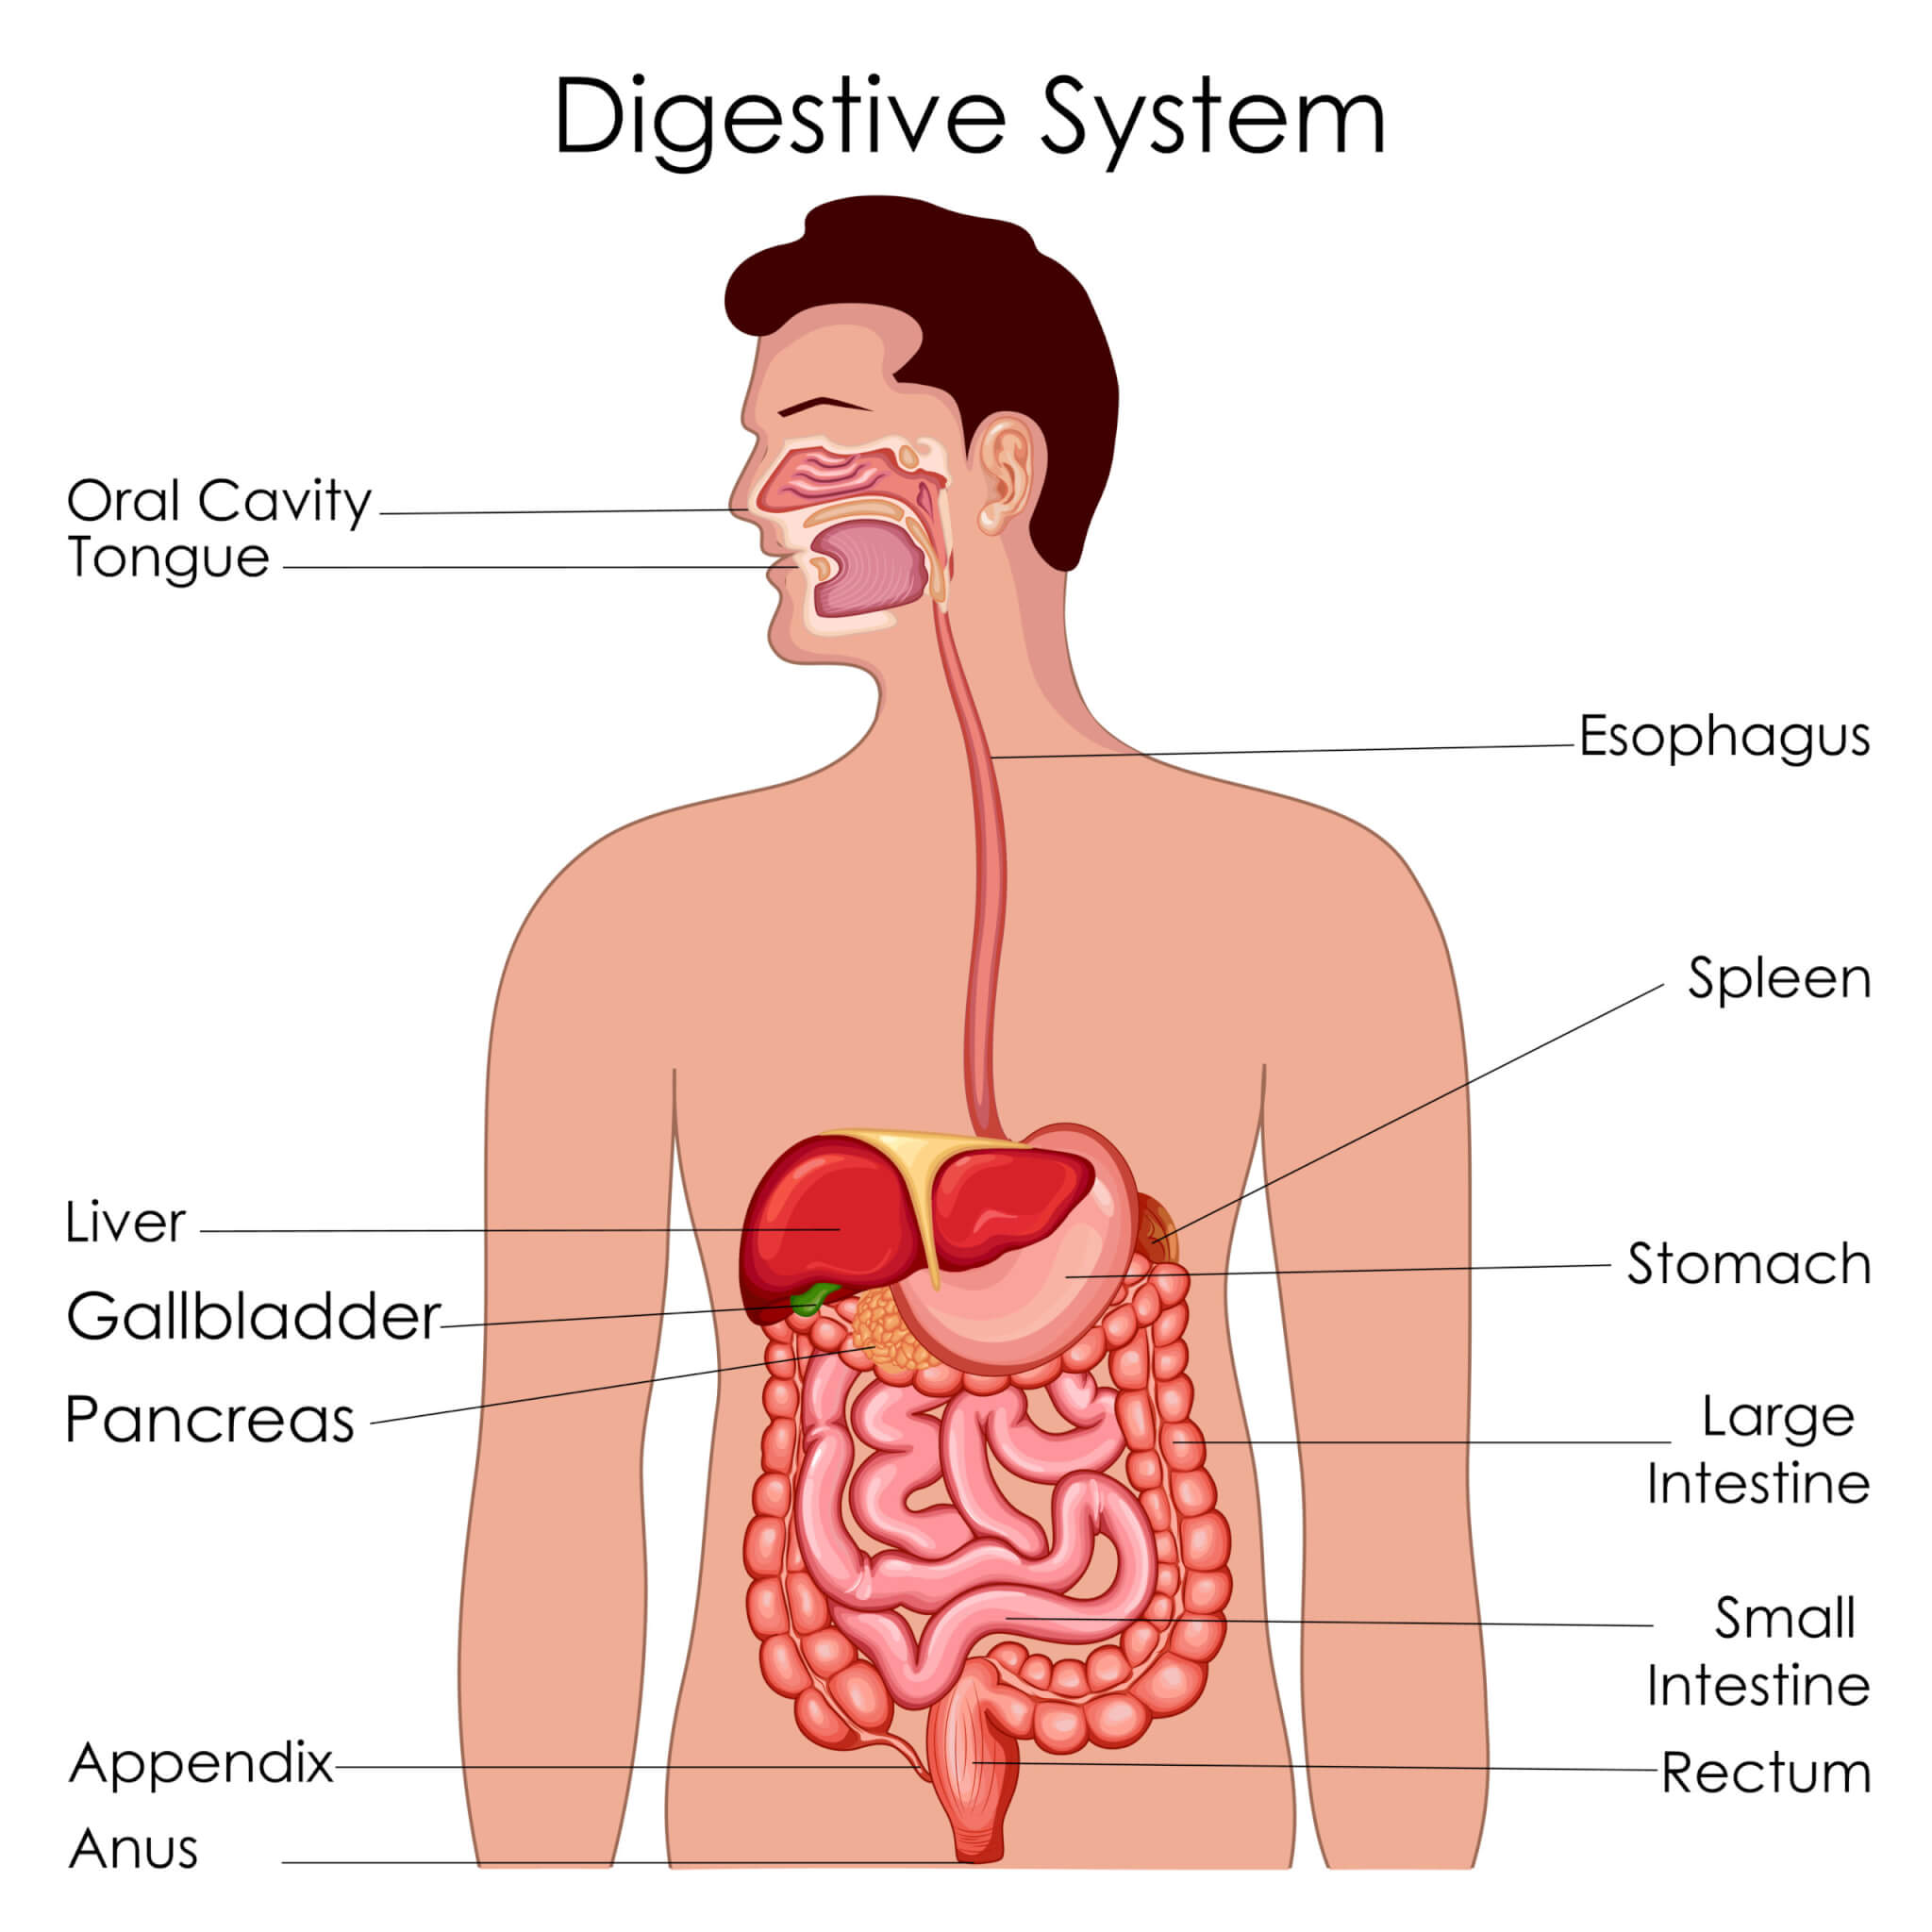 Anatomy of the digestive system.